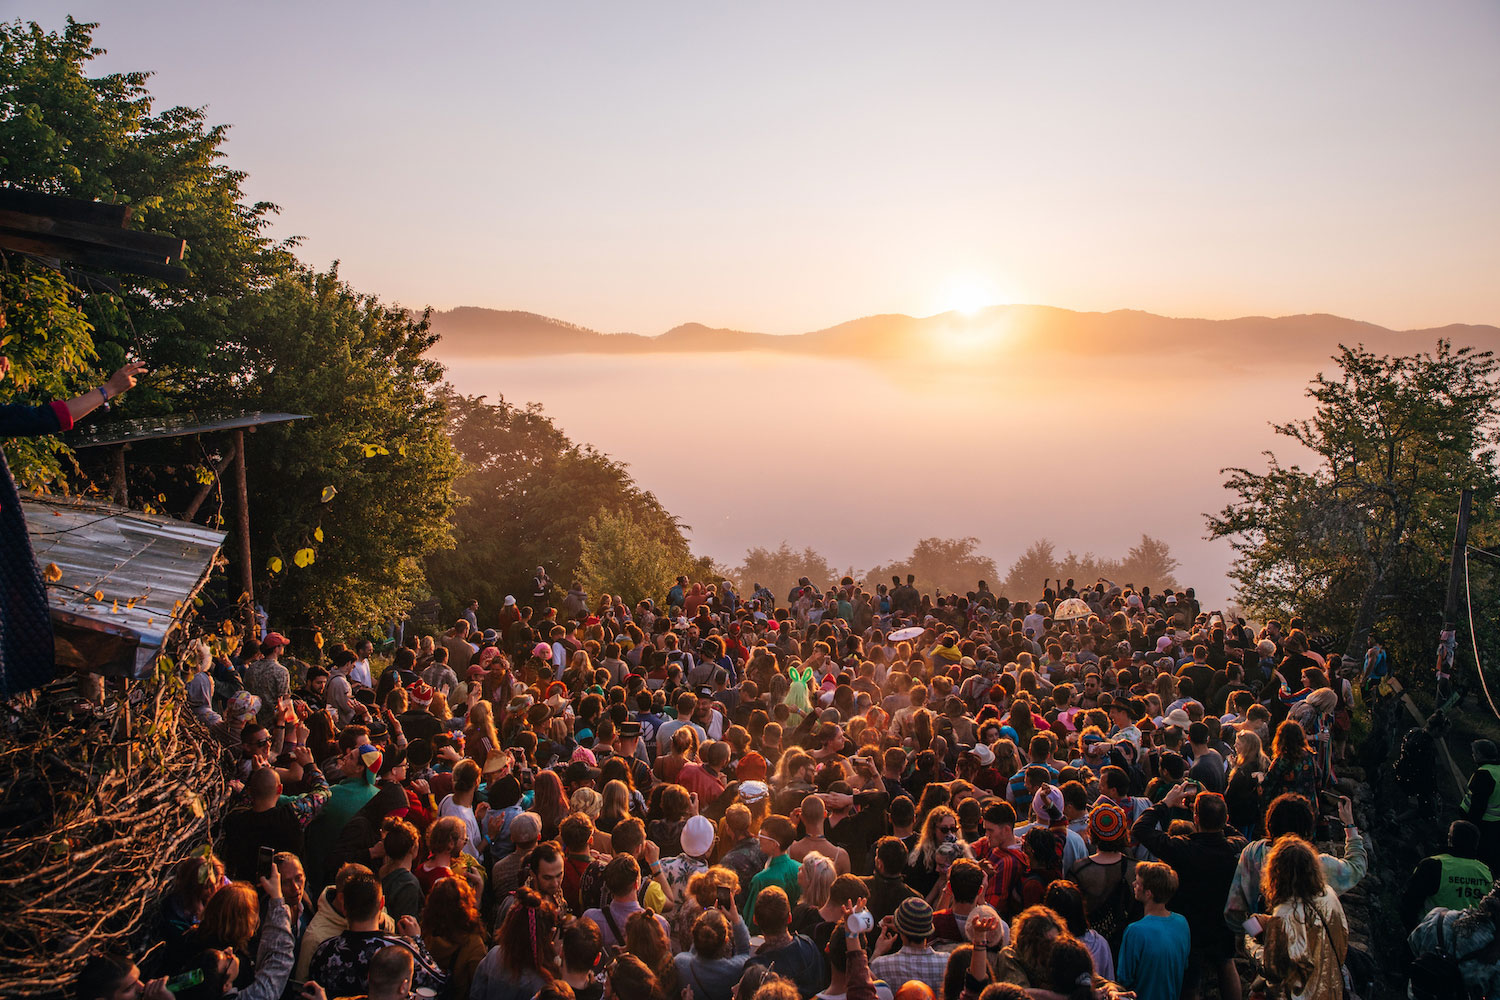 Revellers gather at Meadows in the Mountains. Image: Lara Maisa